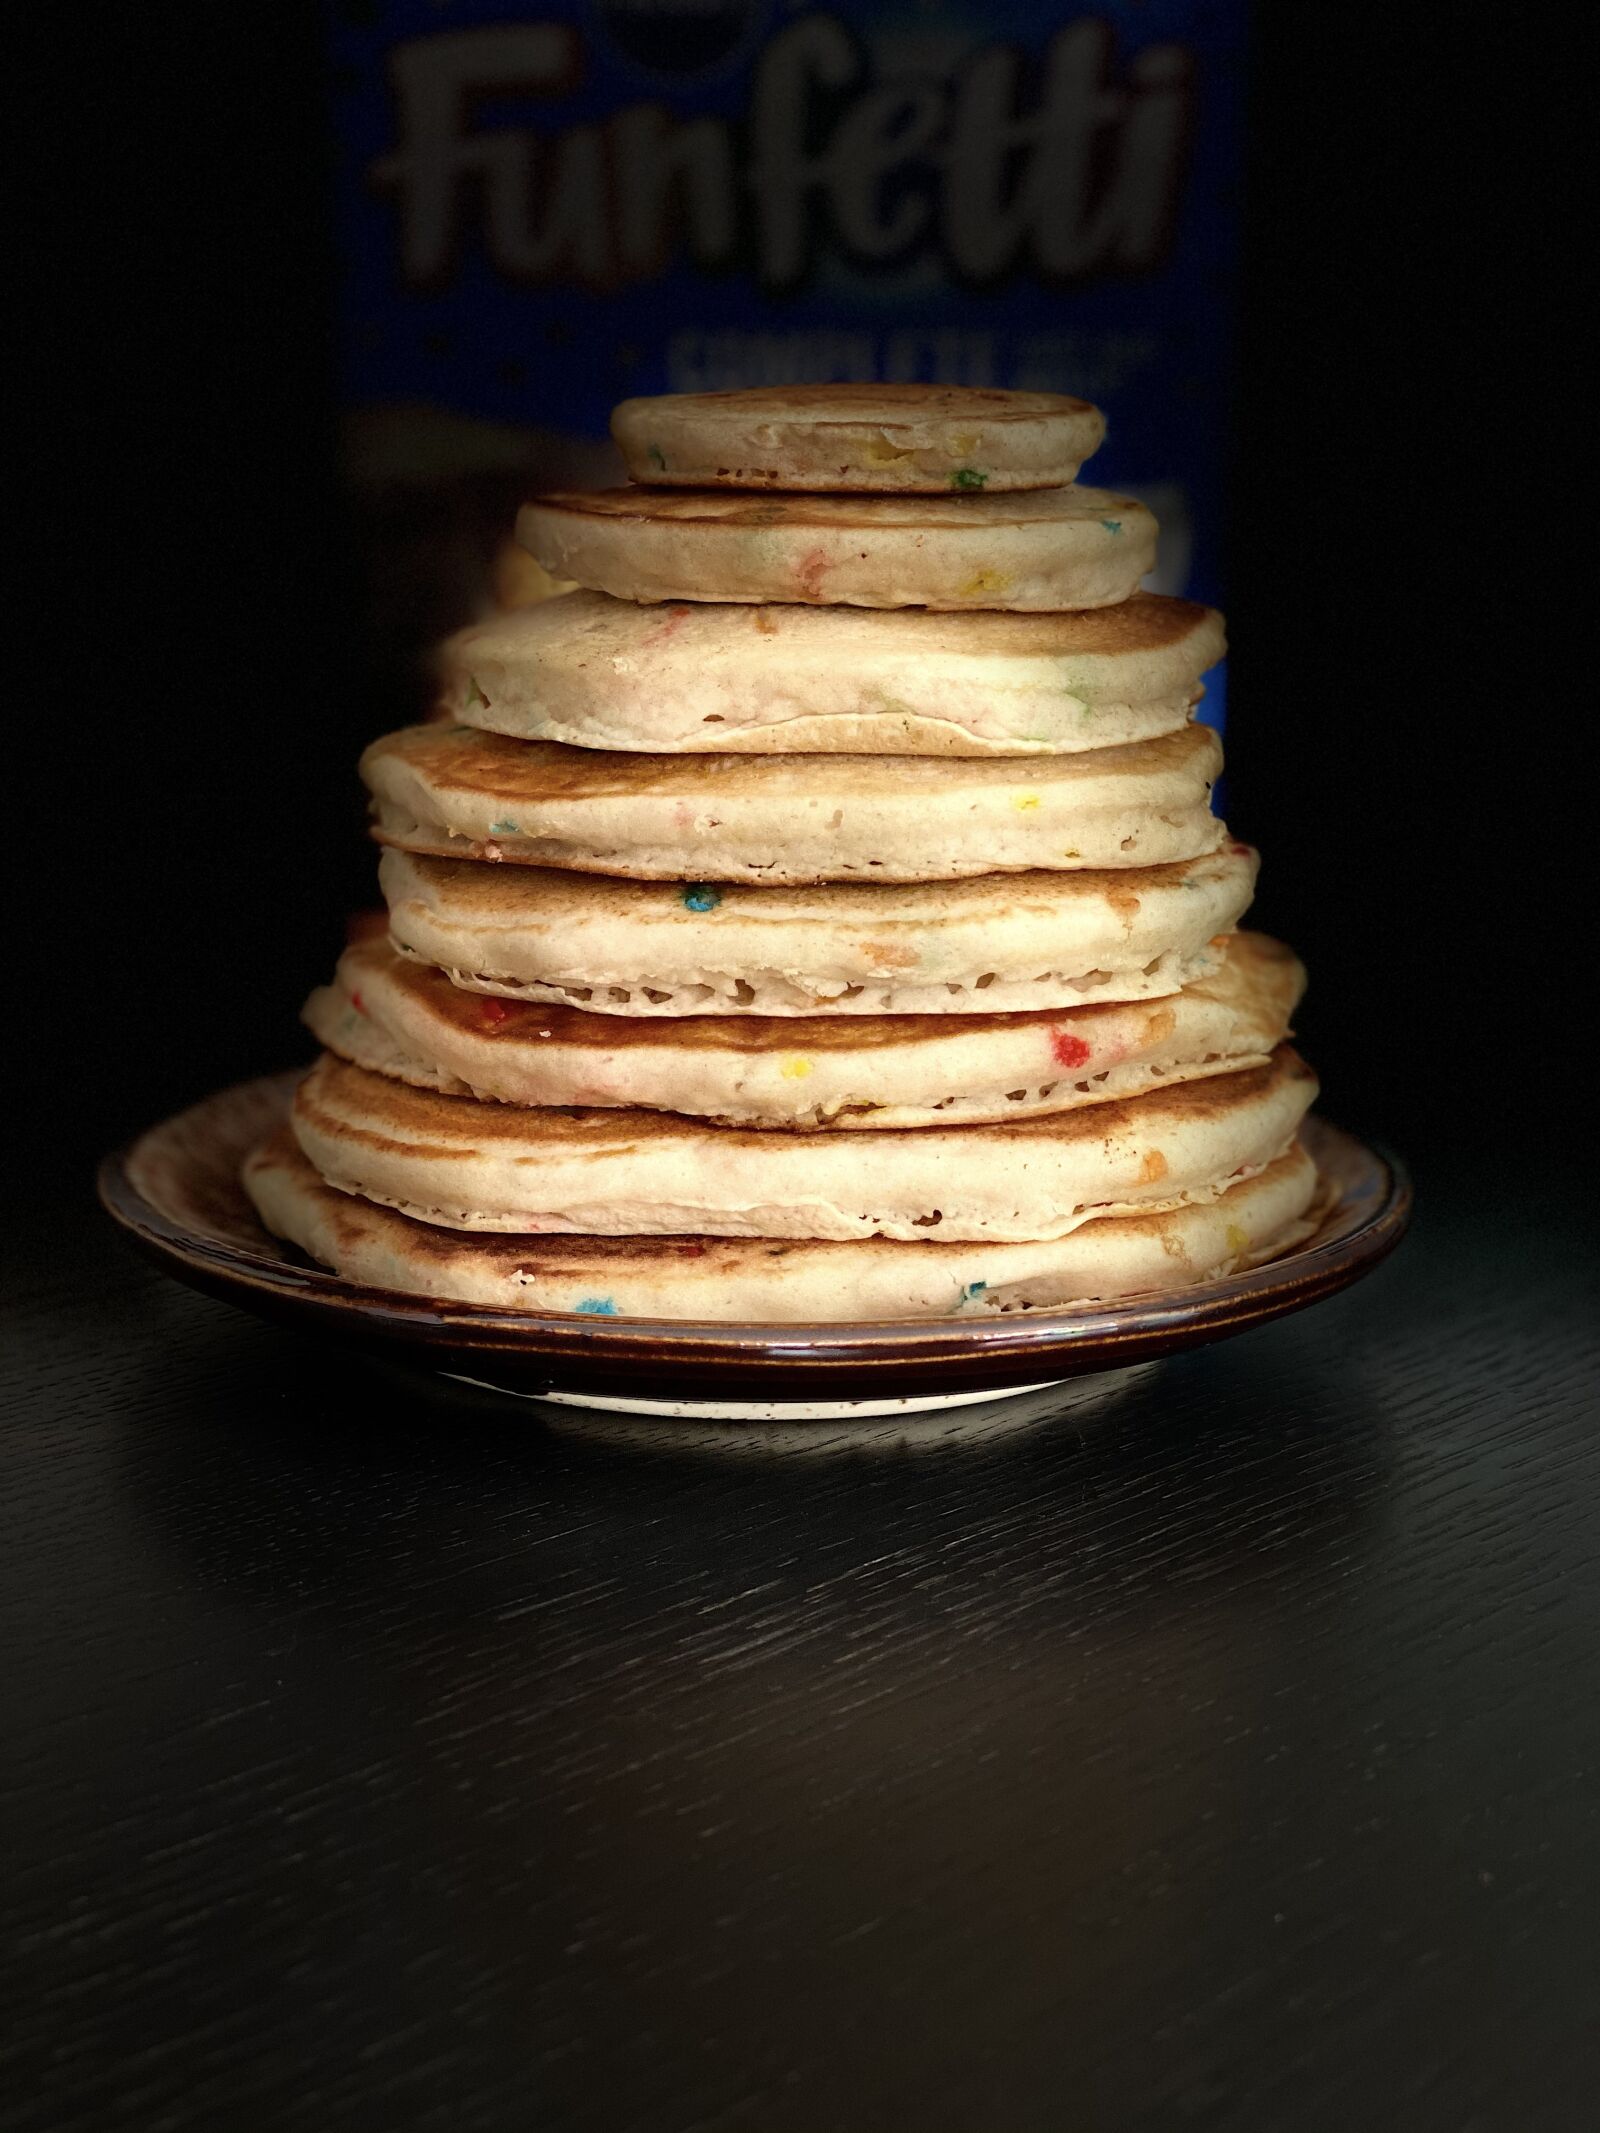 Apple iPhone 11 Pro Max + iPhone 11 Pro Max back dual camera 6mm f/2 sample photo. Pancakes, stack of pancakes photography